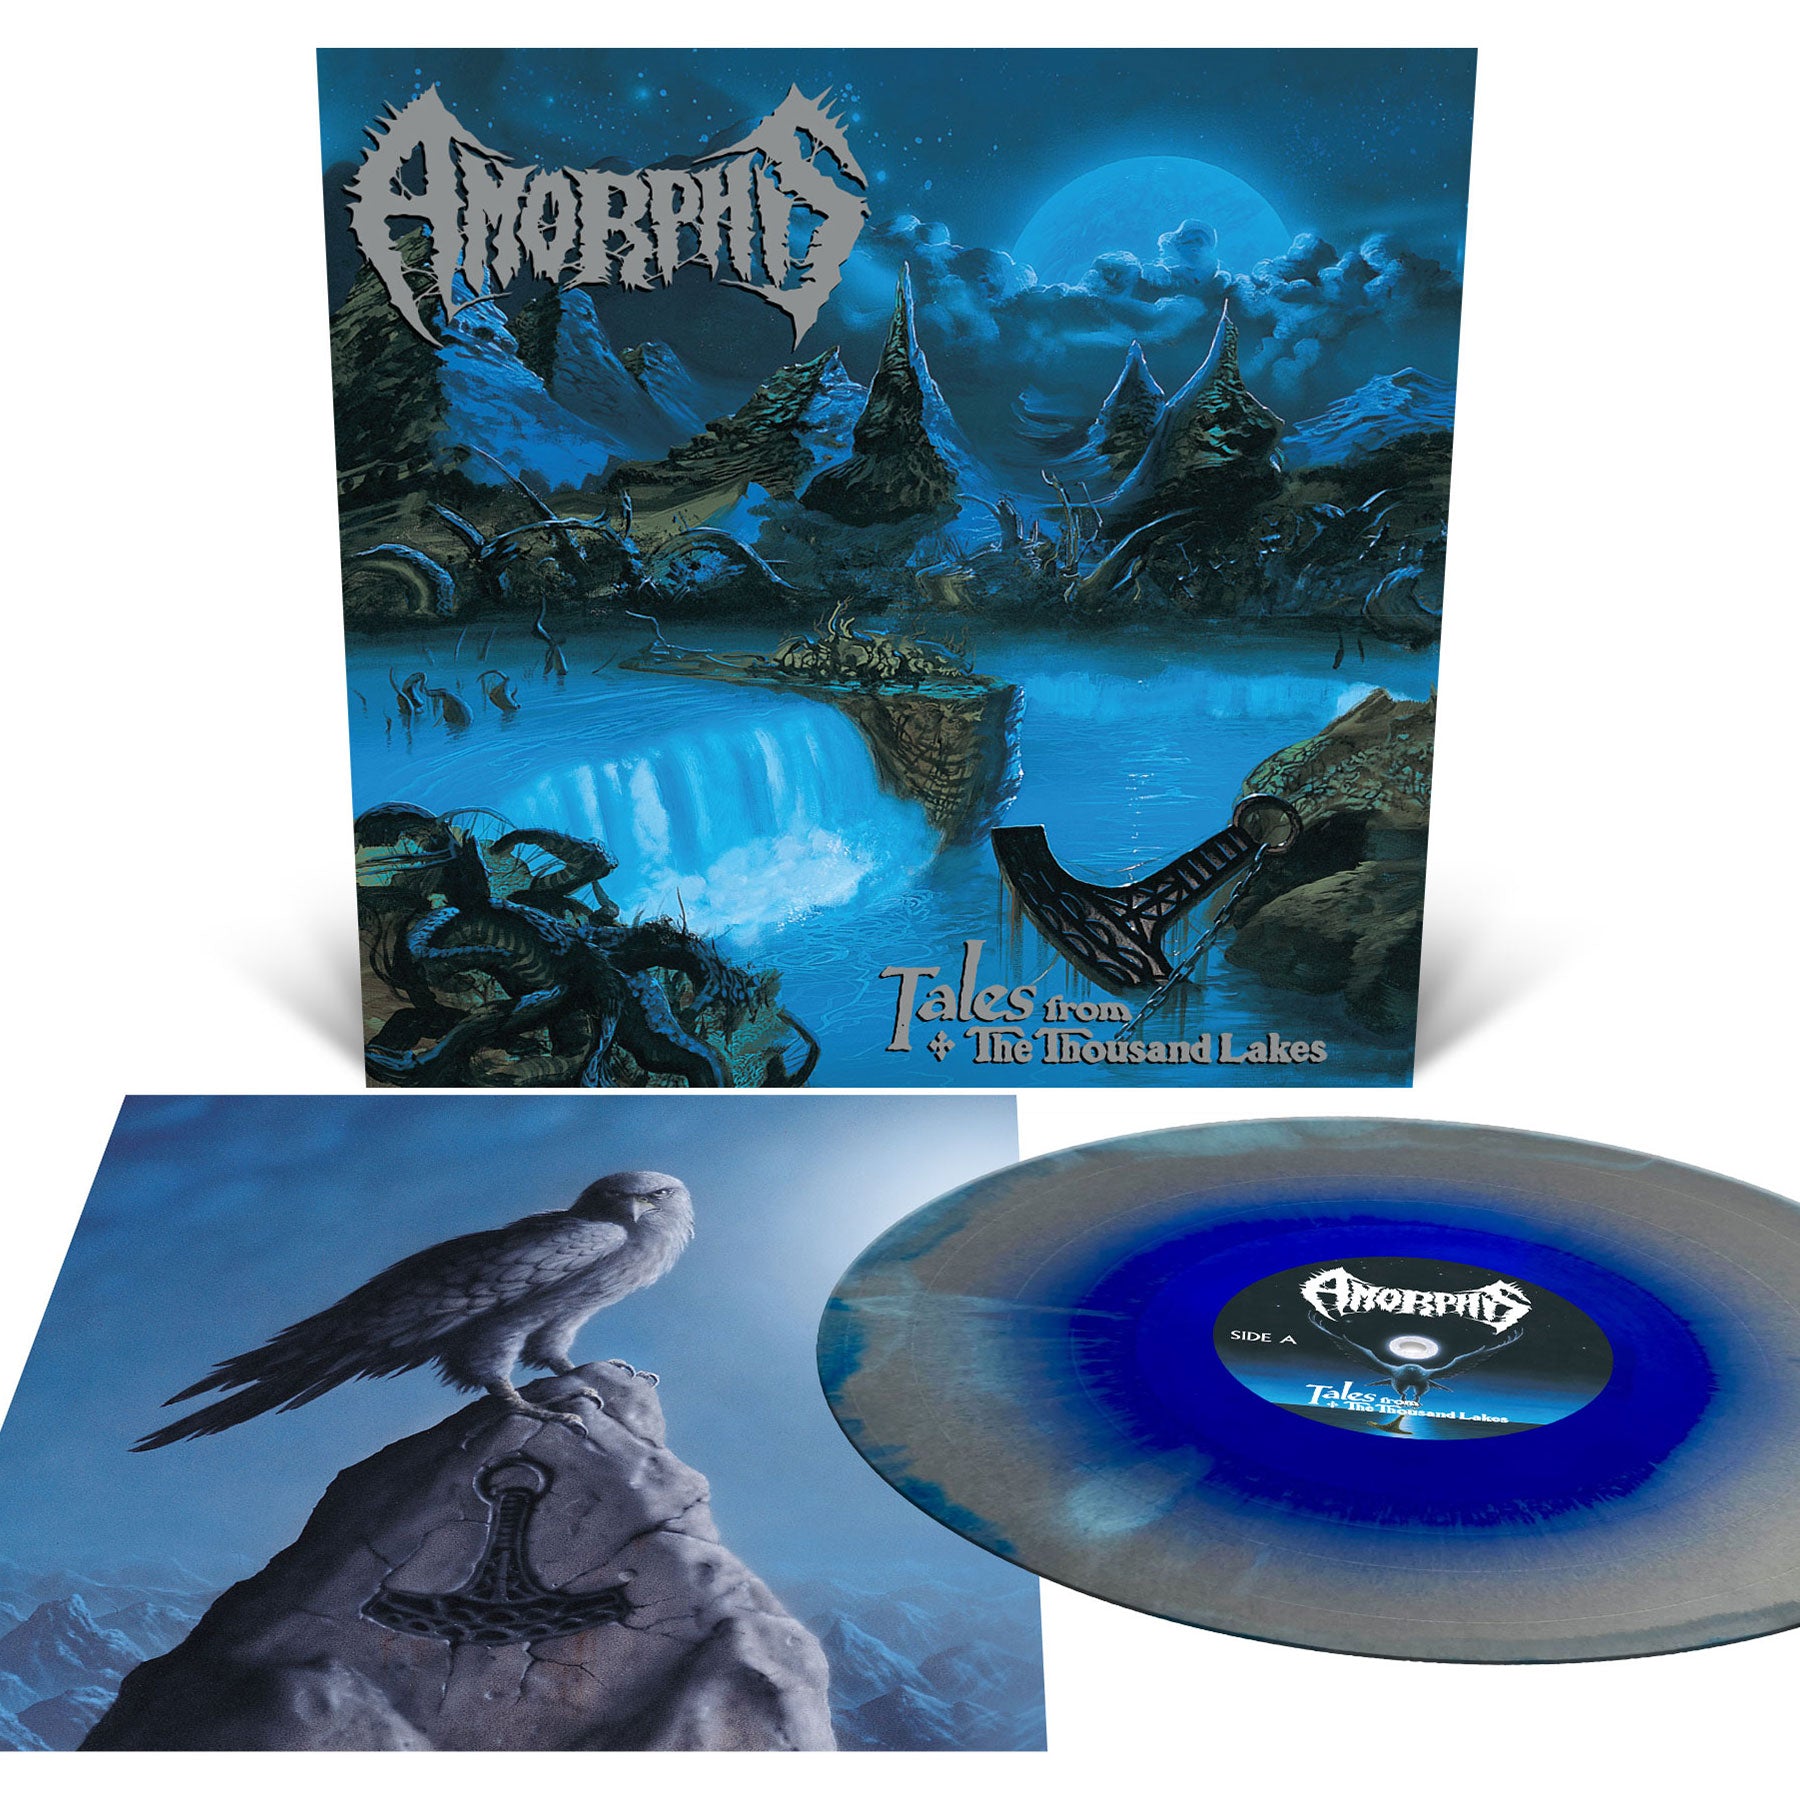 Amorphis "Tales From The Thousand Lakes (Reissue)" 12"